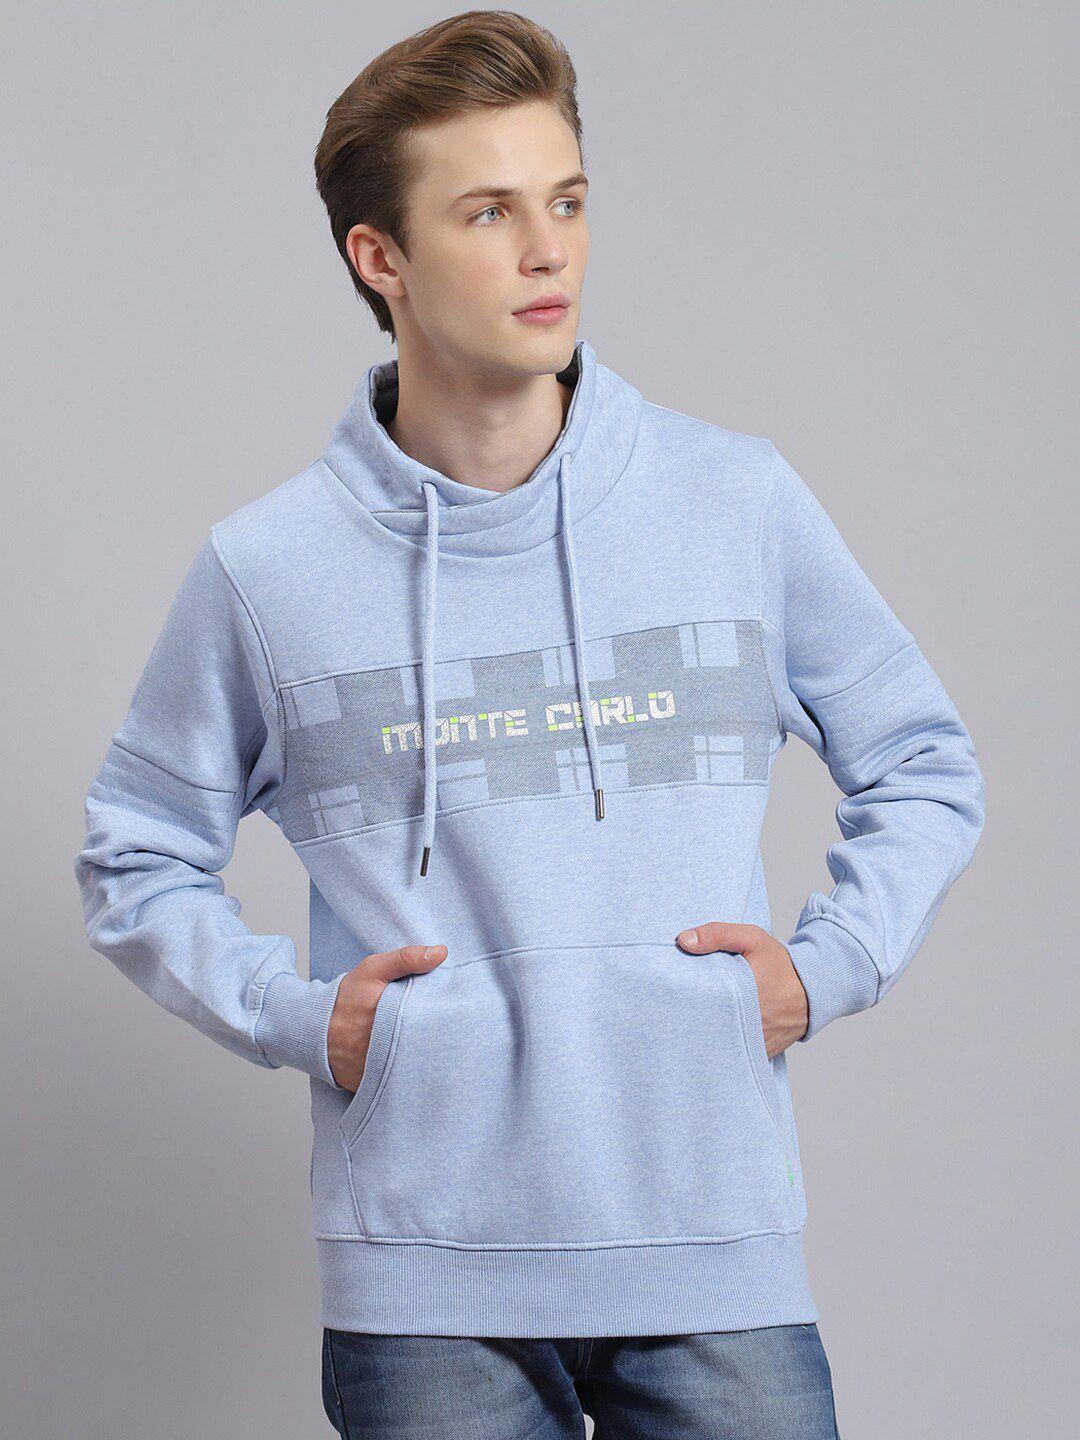 monte-carlo-typography-printed-turtle-neck-pullover